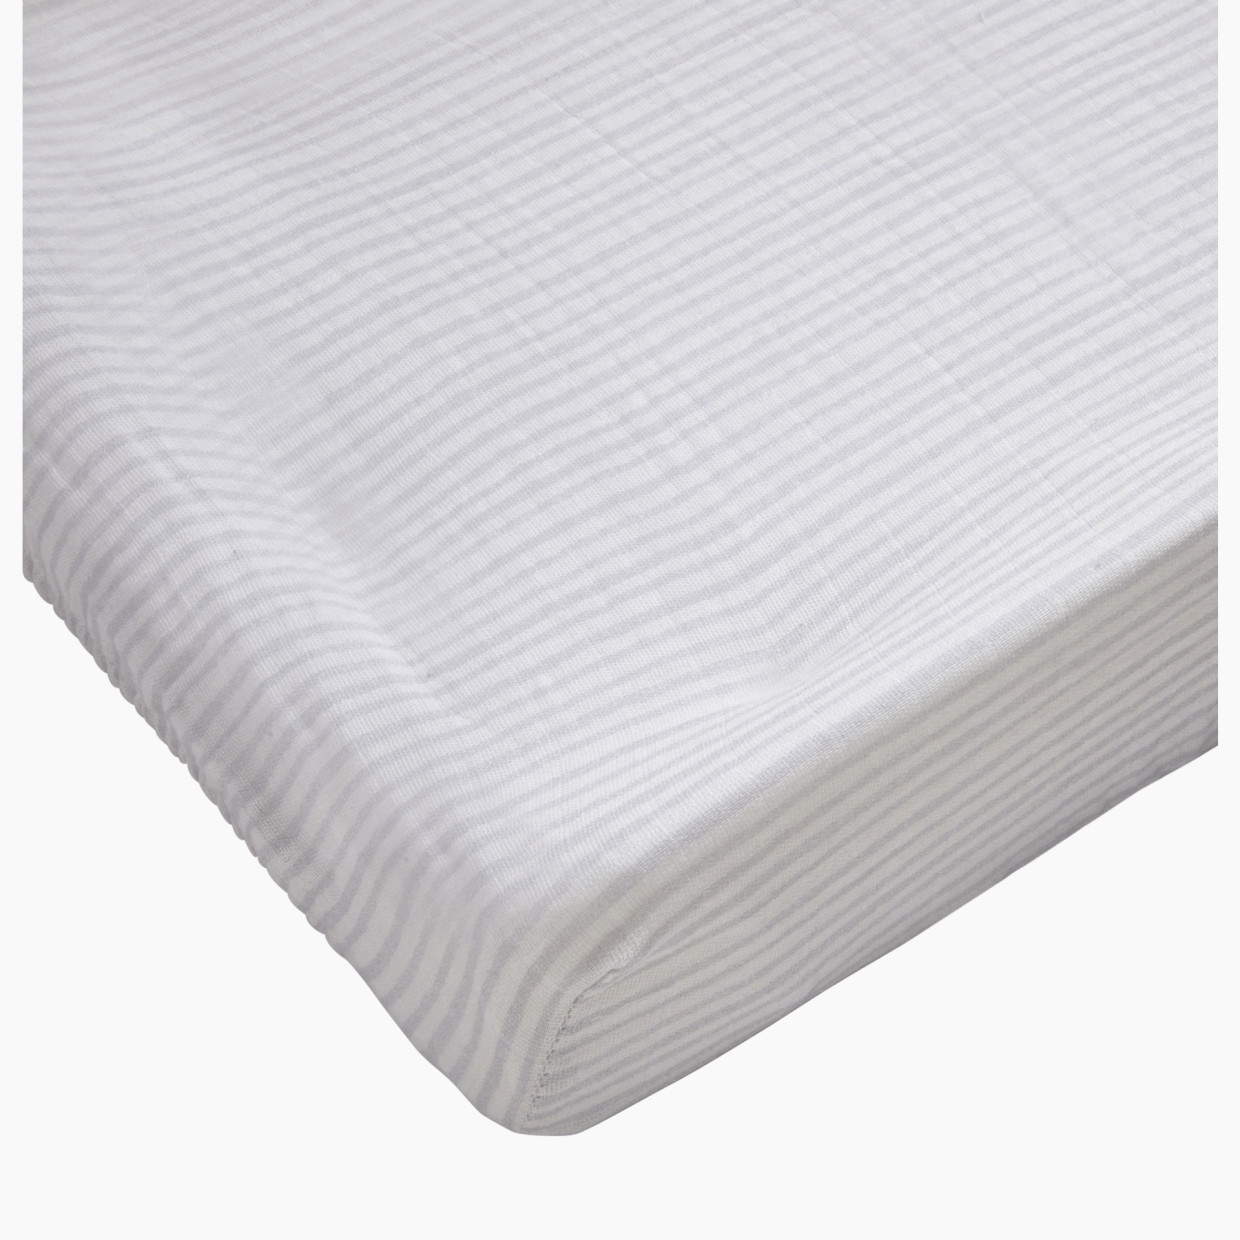 Tiny Kind Muslin Changing Pad Cover - Painted Stripe.